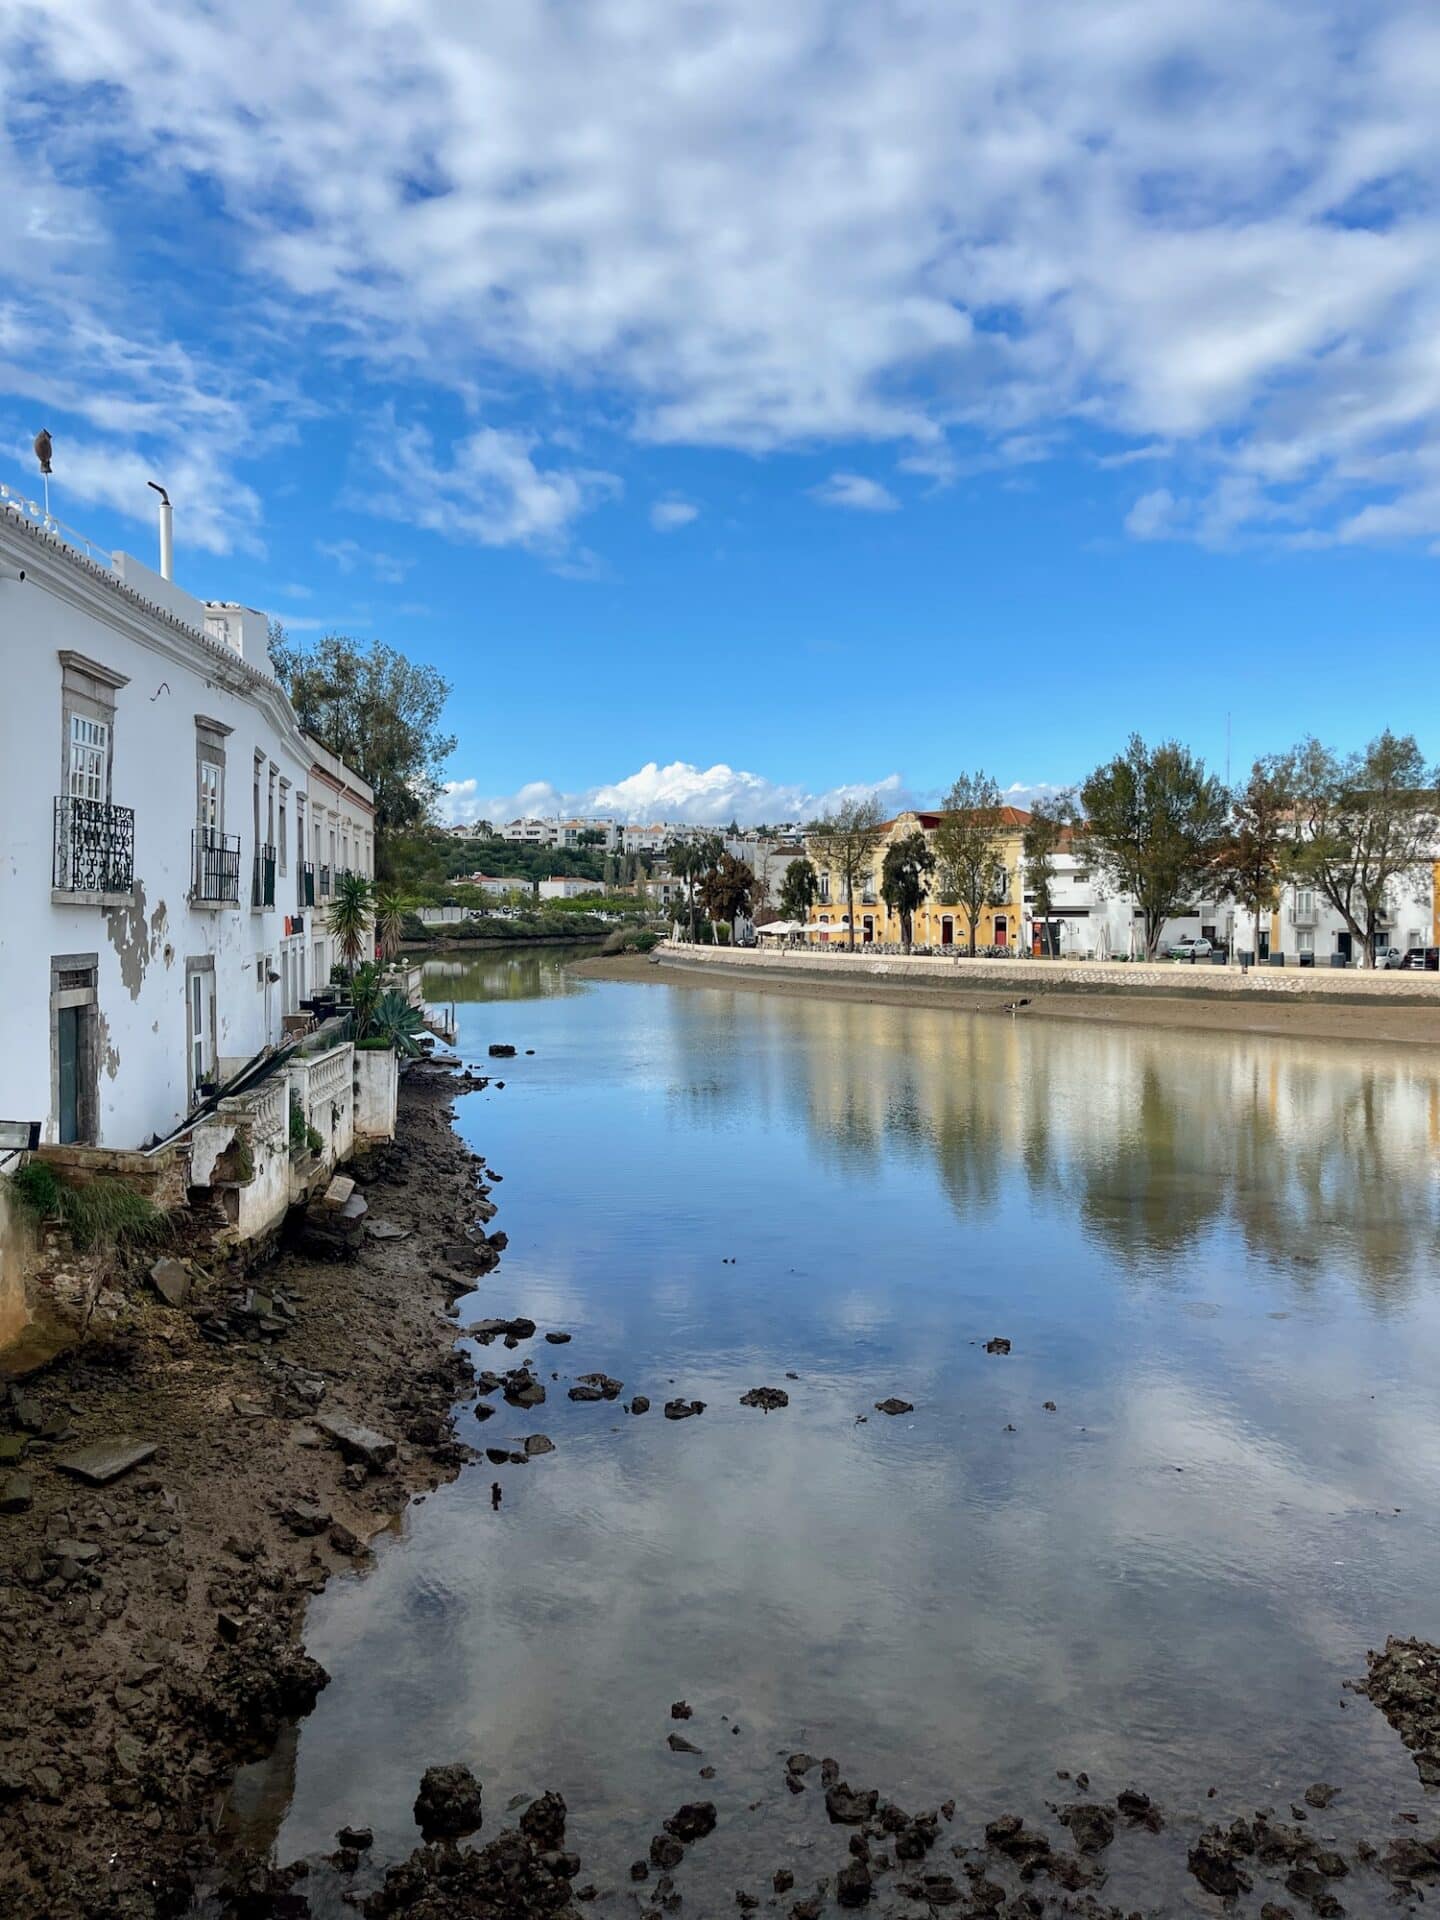 Calm waters of the Gilão River mirror the sky, flanked by the white facades of traditional buildings in Tavira's riverside promenade.